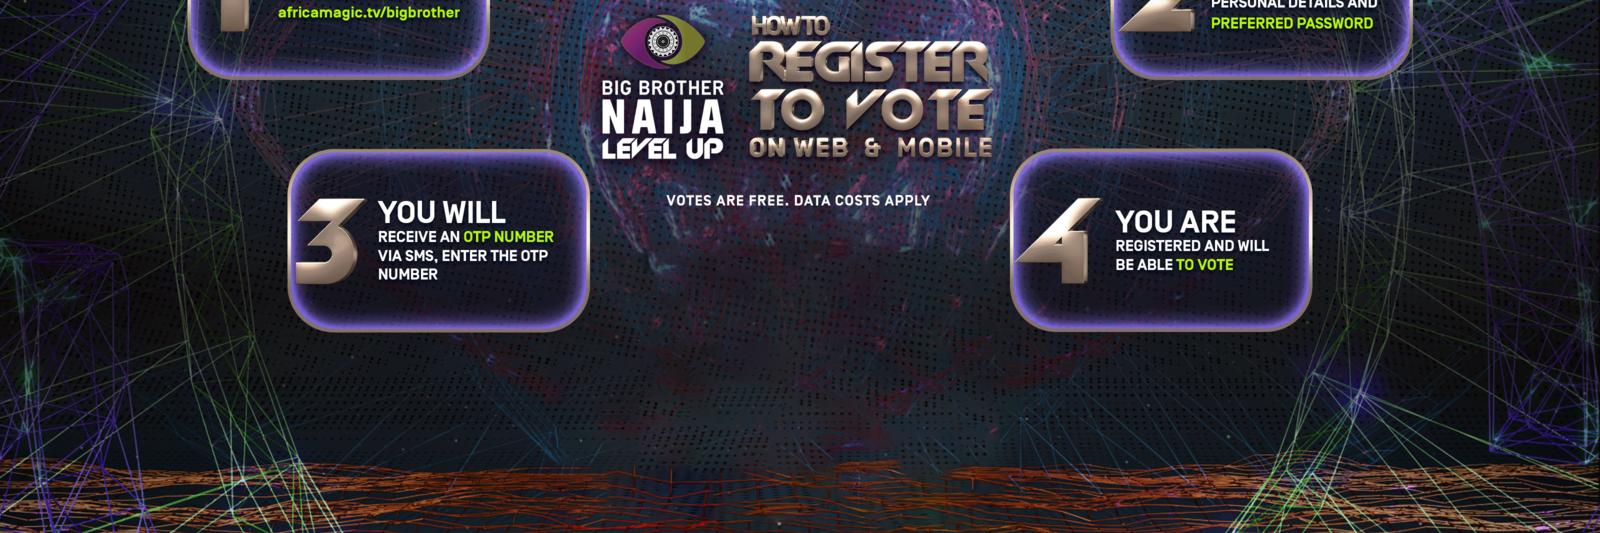 1659377341 27 bbn 7 2022 how to reg to vote mobile billboard 1600 x 800